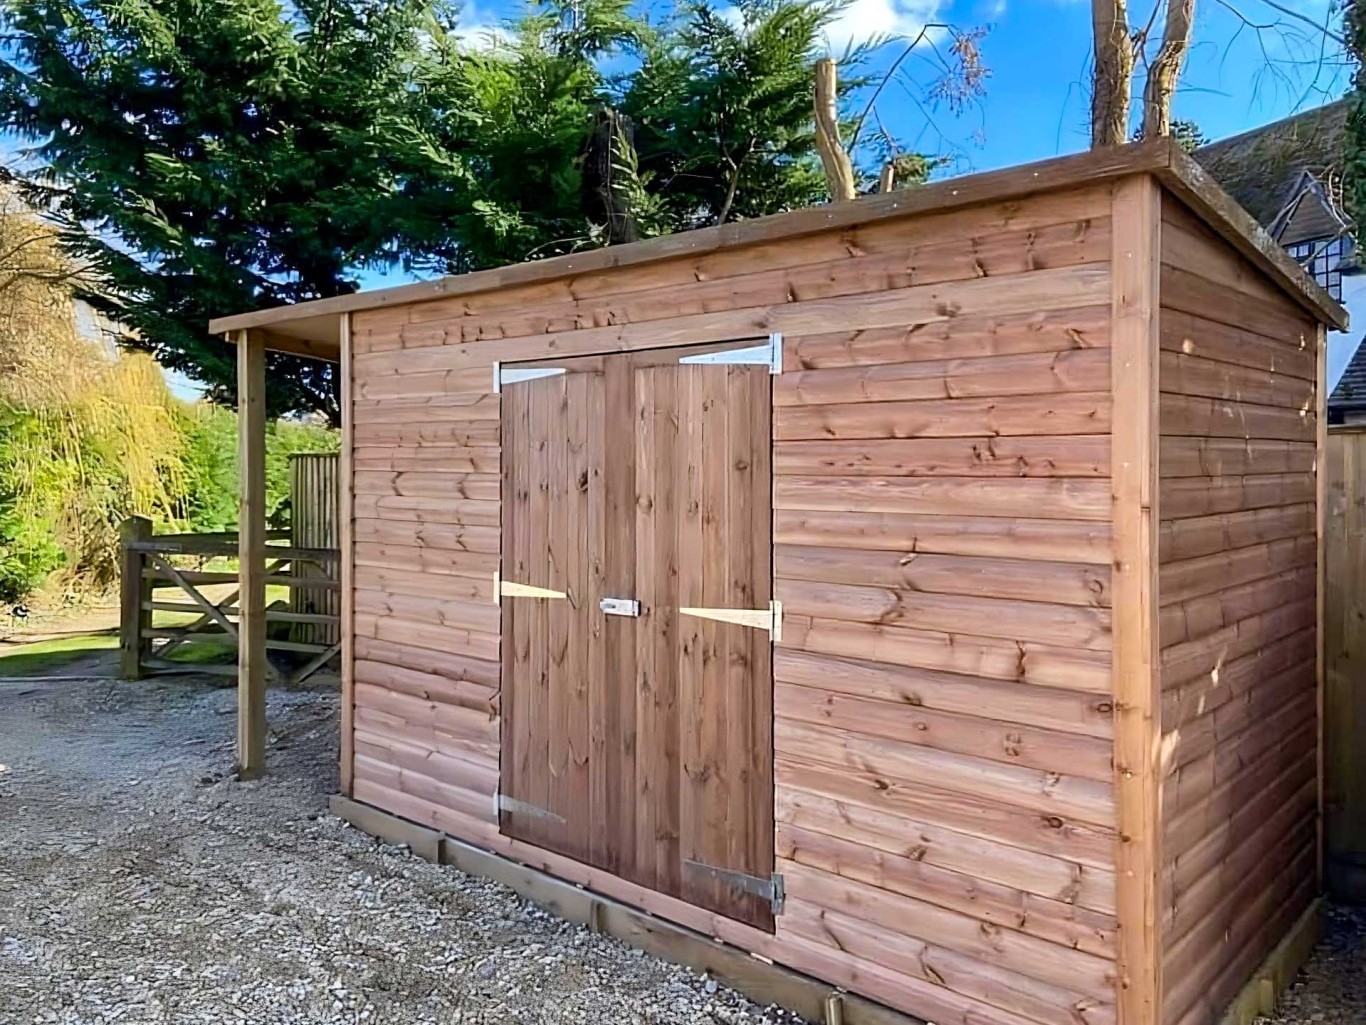 Large timber shed with double doors and shelter on the side.